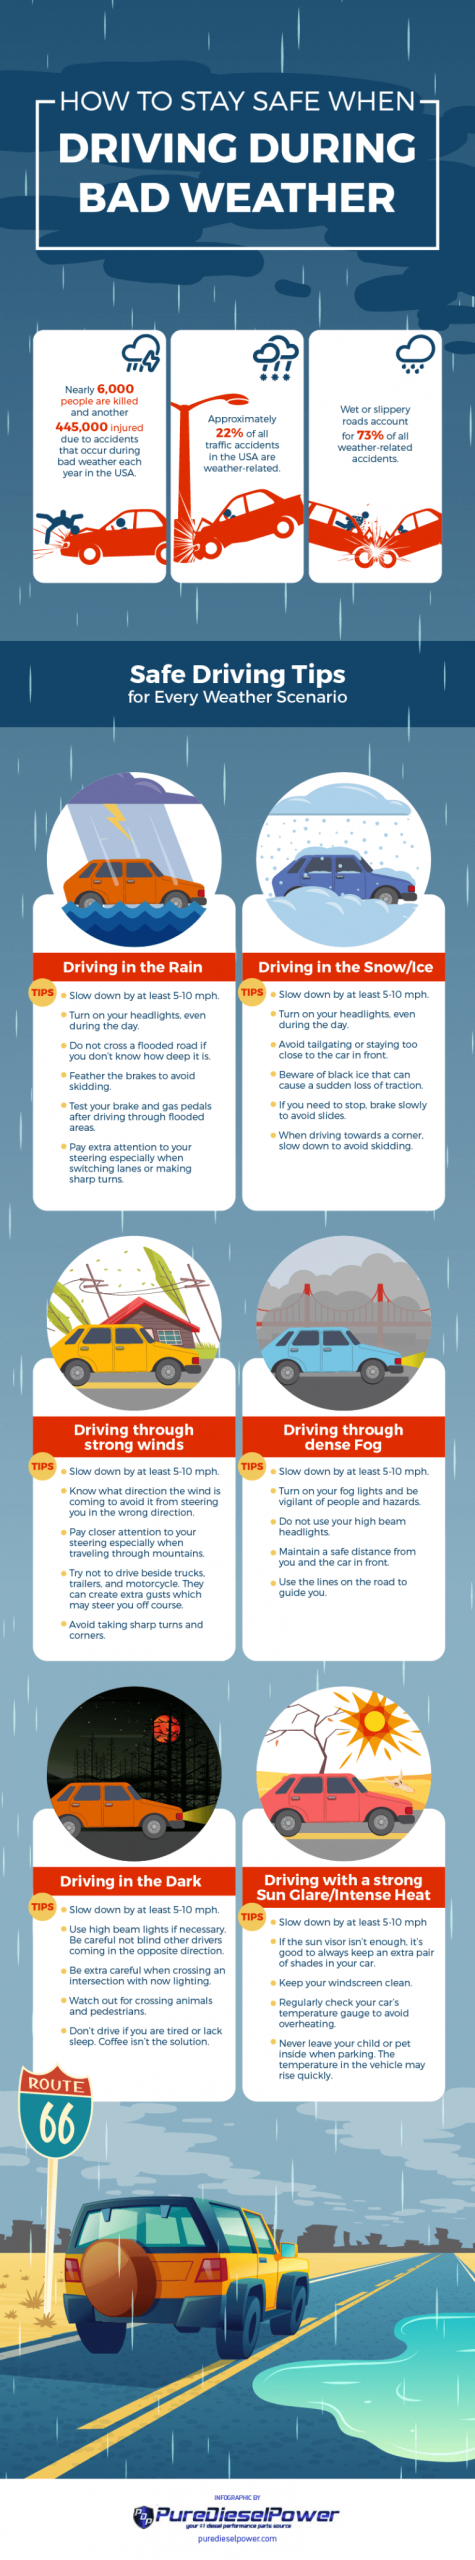 How to Stay Safe When Driving During Bad Weather